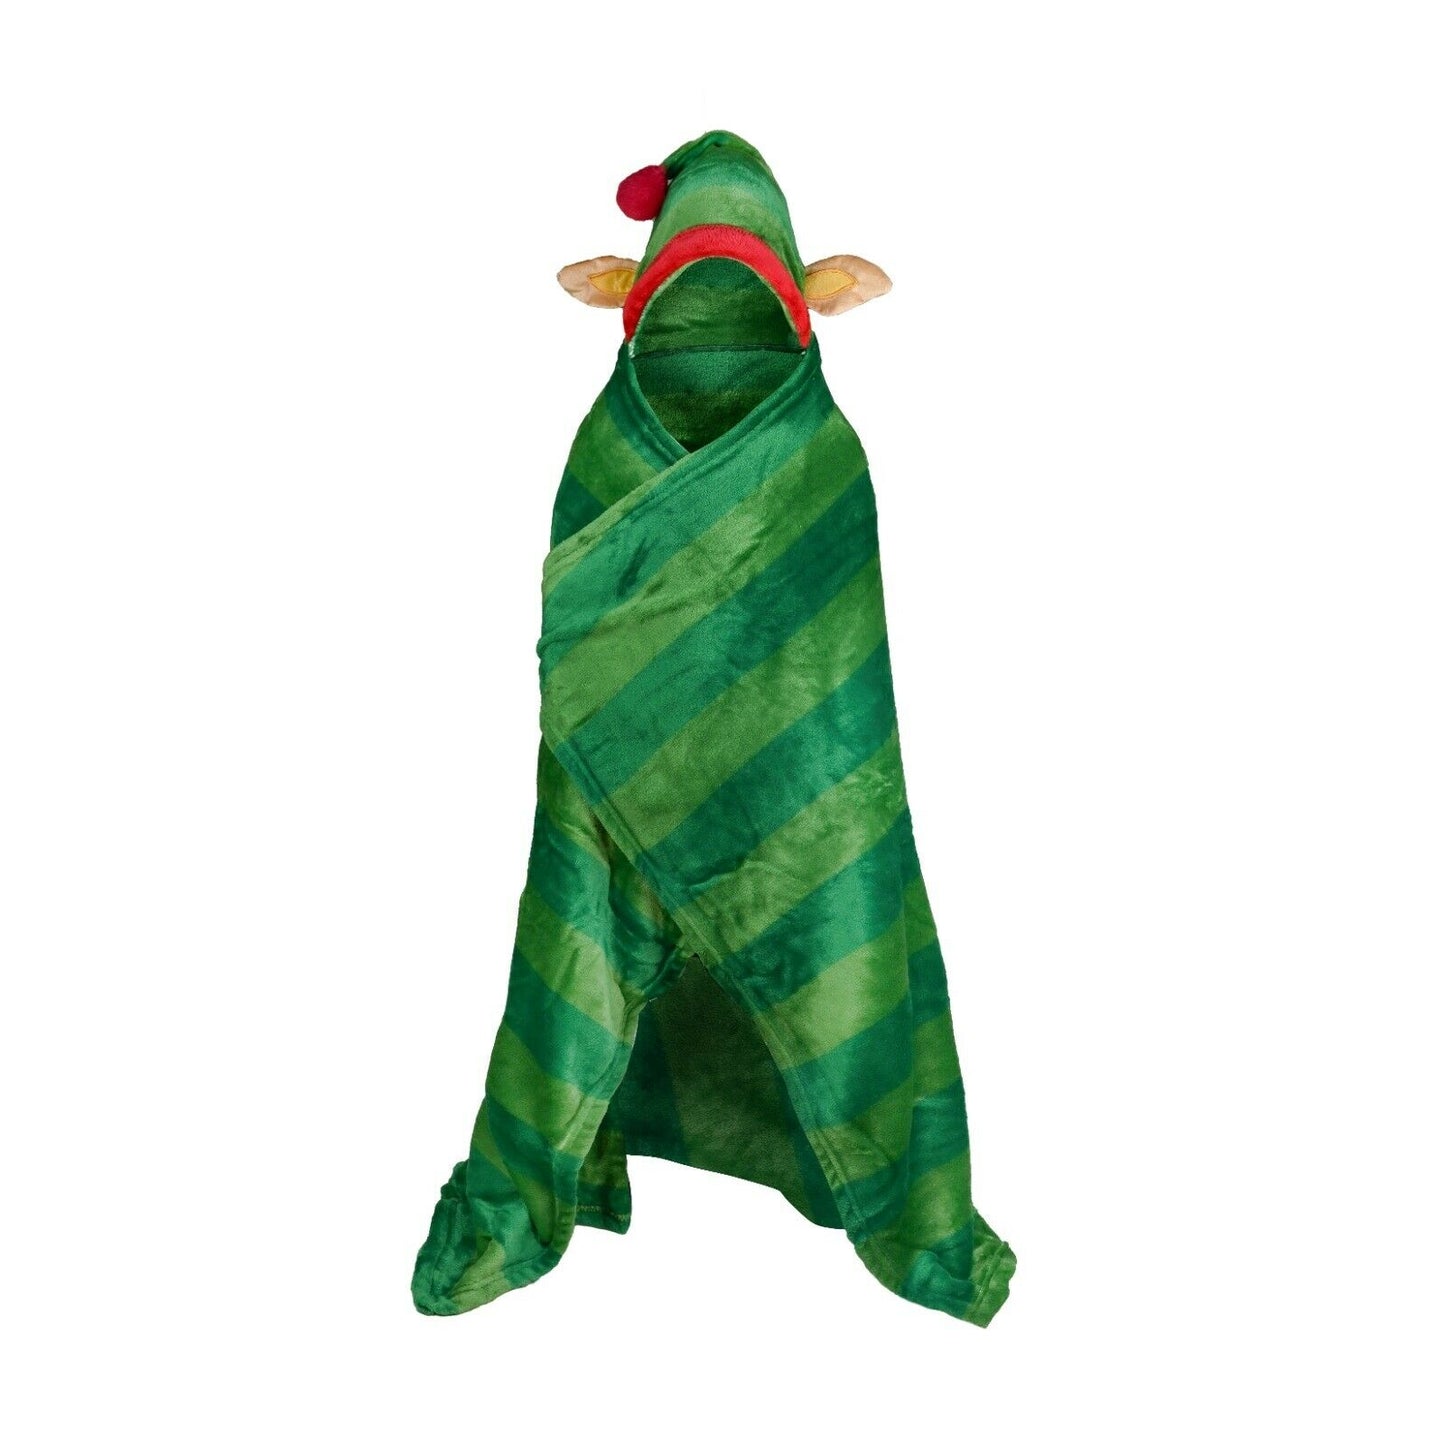 Children's Elf Novelty Hooded Fleece Blanket, These Are Super Soft And Perfect For The Festive Season As A Gifts, They Measure 110cm x140cm, 100% Polyester (Excludes Trimming)